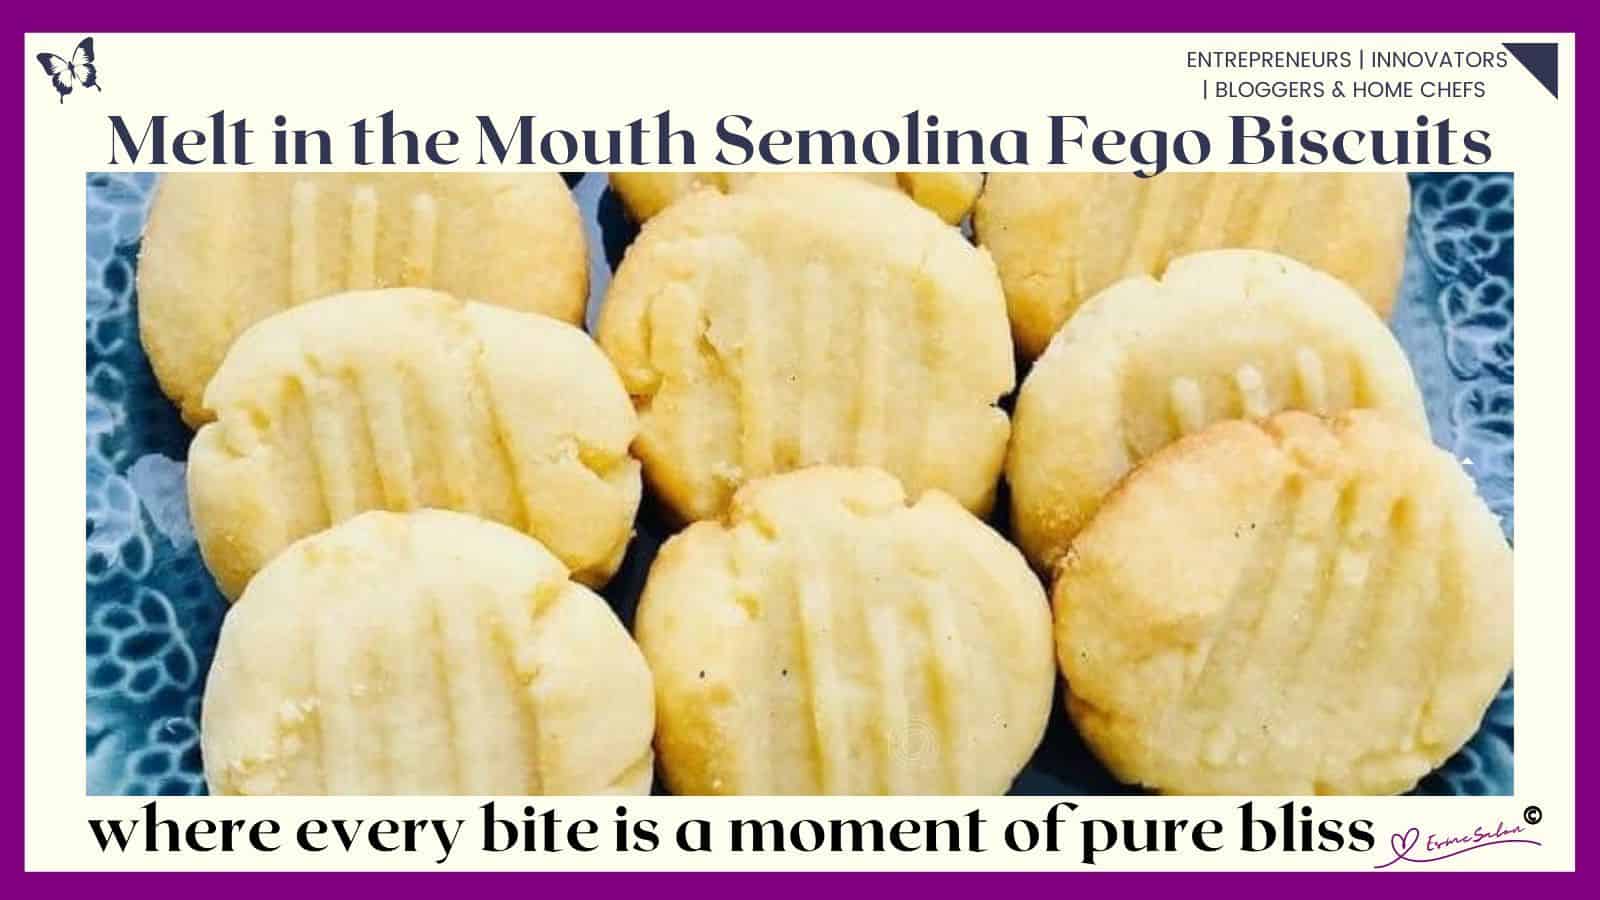 an image of a blue serving plate filled with round Semolina Fego Biscuits